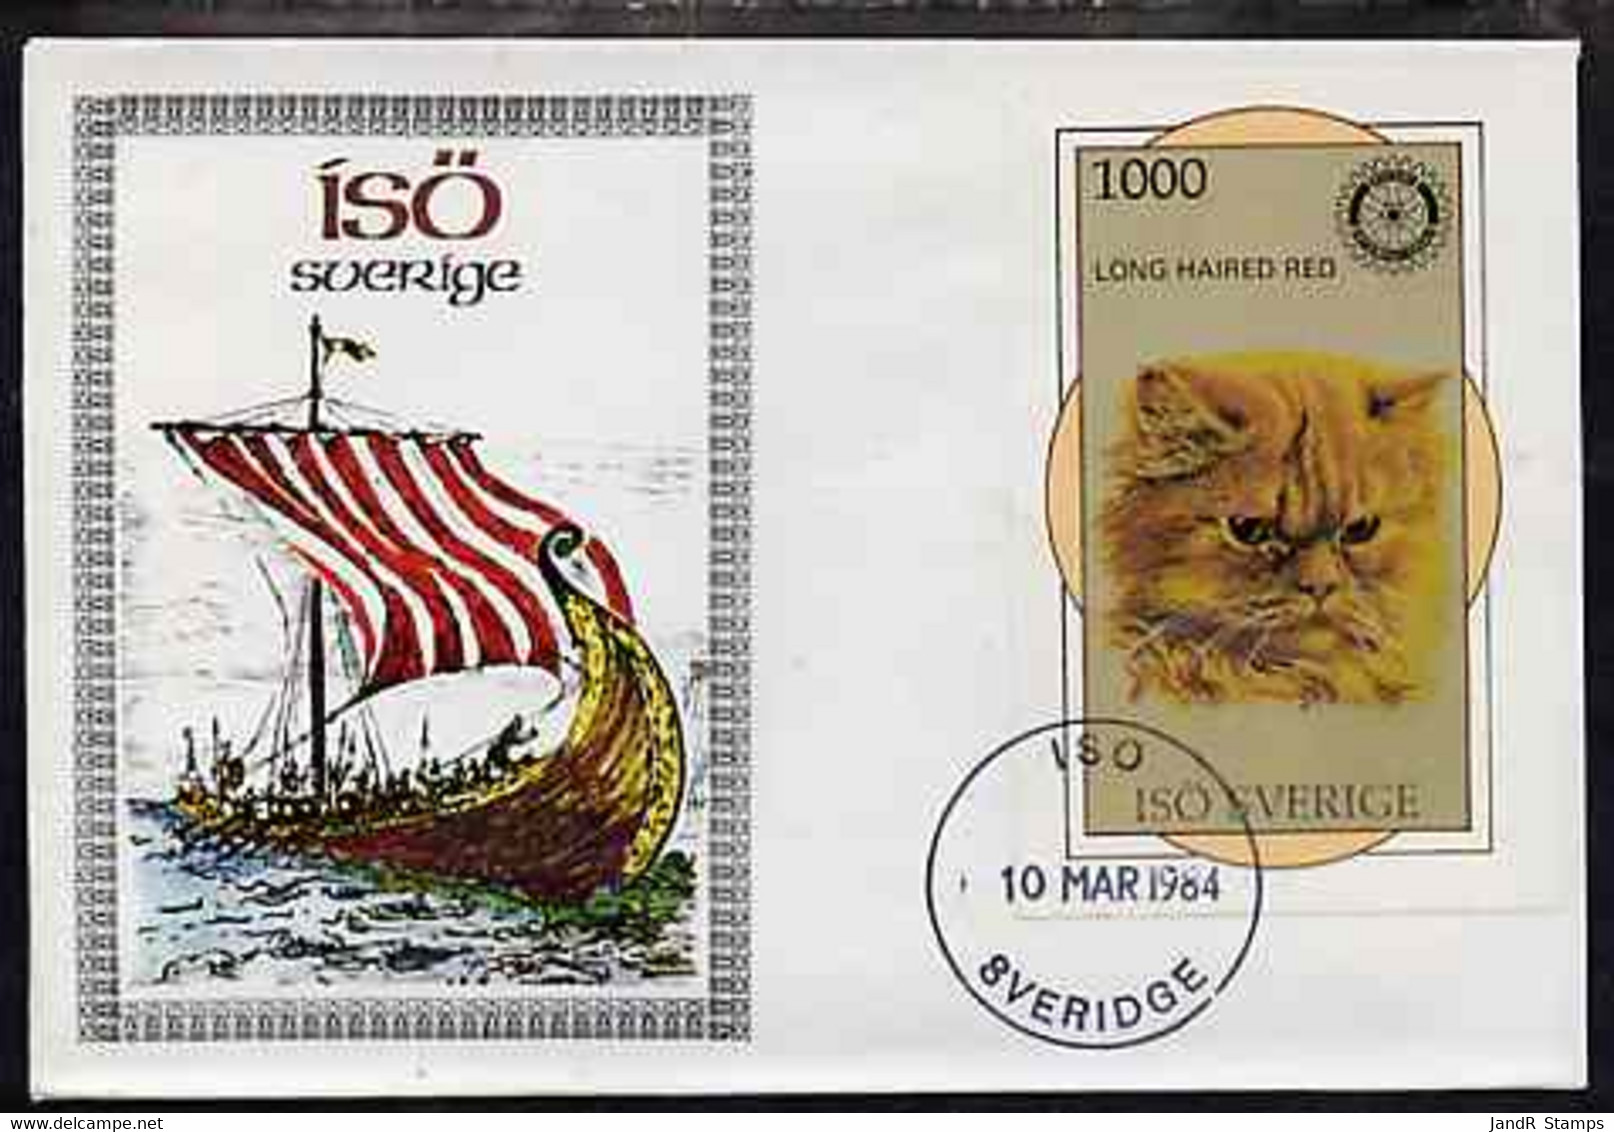 Iso - Sweden 1984 Rotary - Domestic Cats (Long Haired Red) Imperf Deluxe Sheet (1000 Value) On Cover With First Day Canc - Local Post Stamps